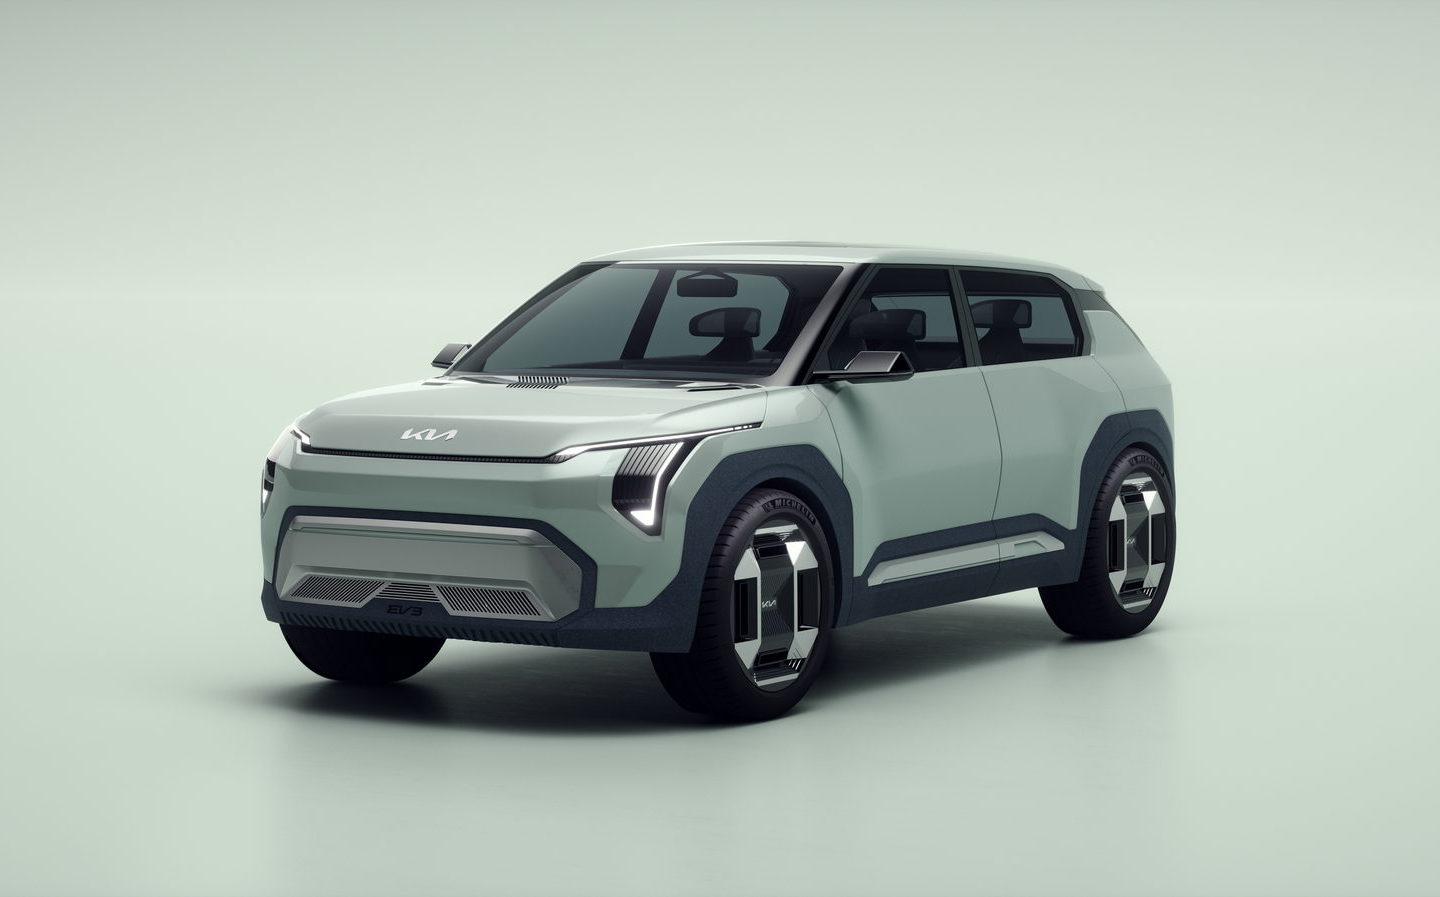 electric cars, kia ev5 to rival tesla model y, with smaller ev3 and ev4 concepts also revealed